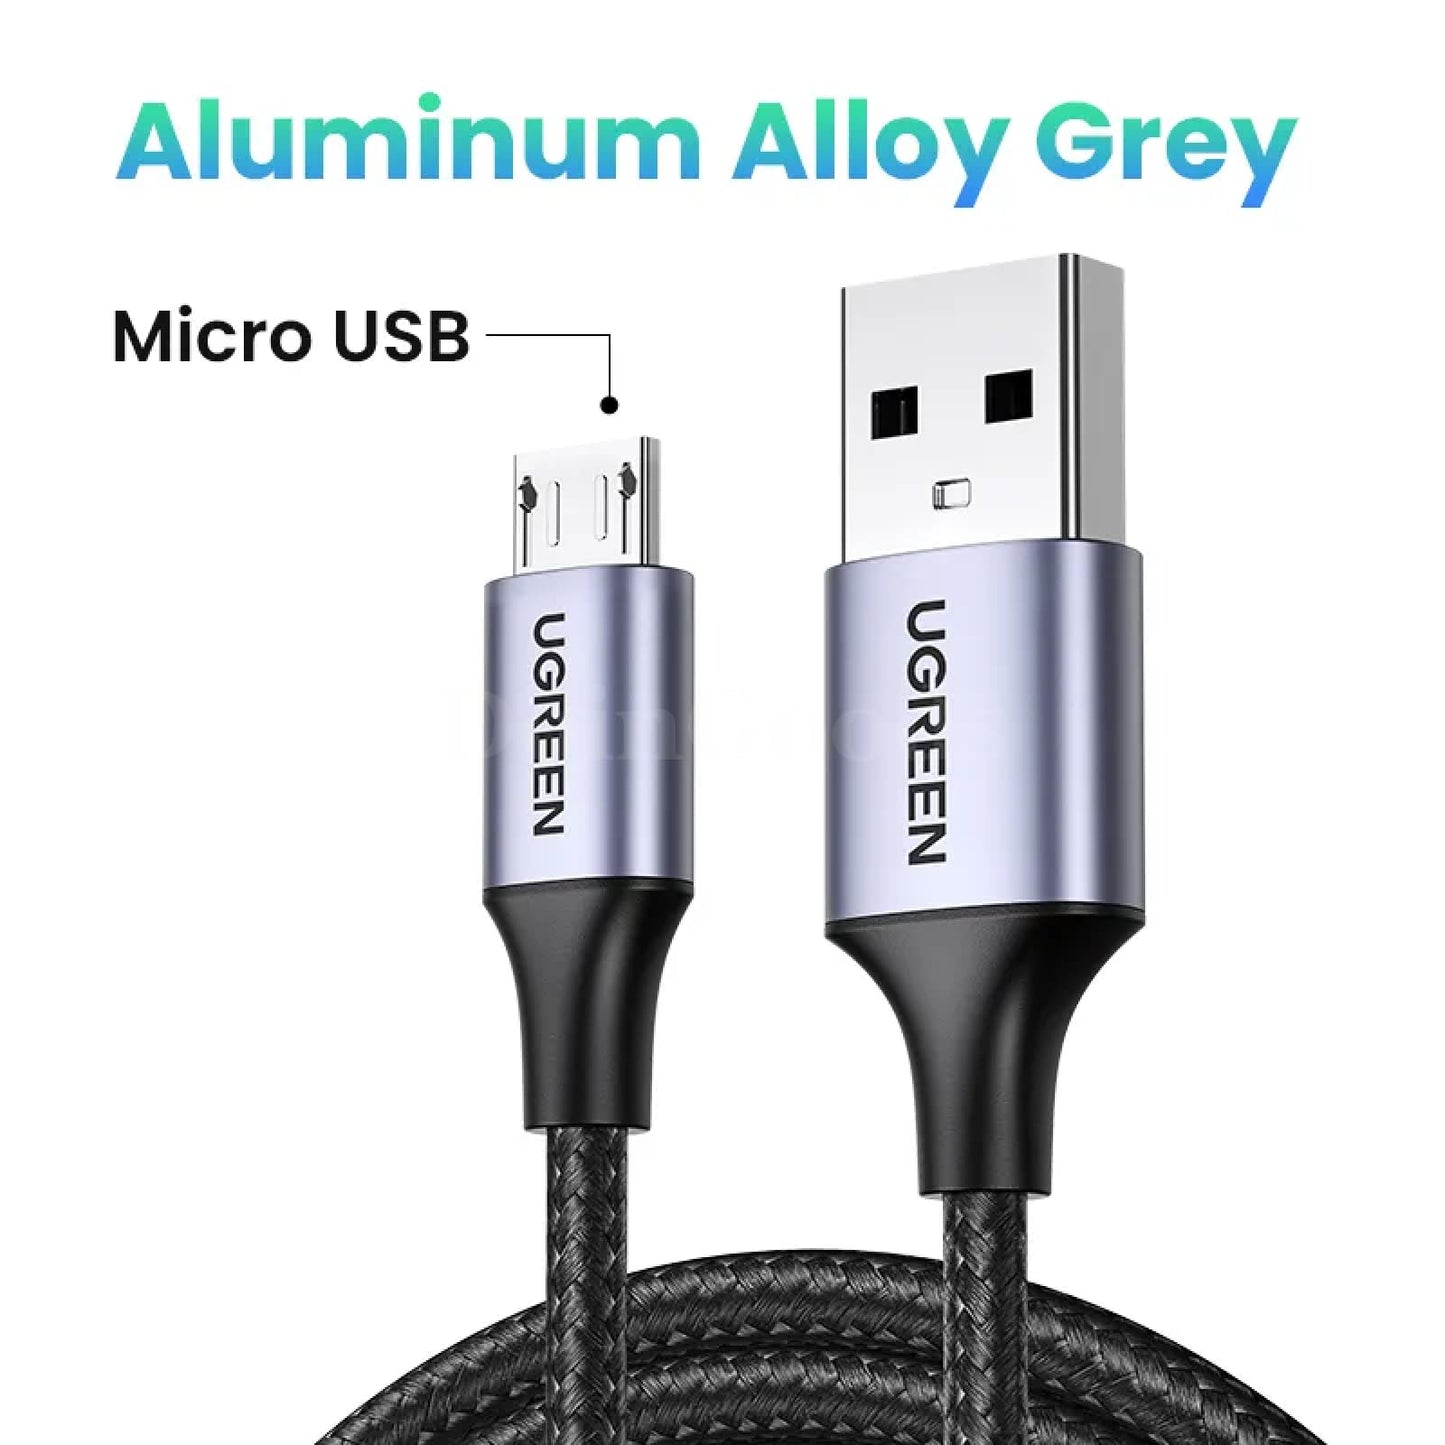 Ugreen Micro Usb Cable Charger For Samsung Galaxy S7 S6 - Fast Charging Mobile Phone Cord Metal Grey